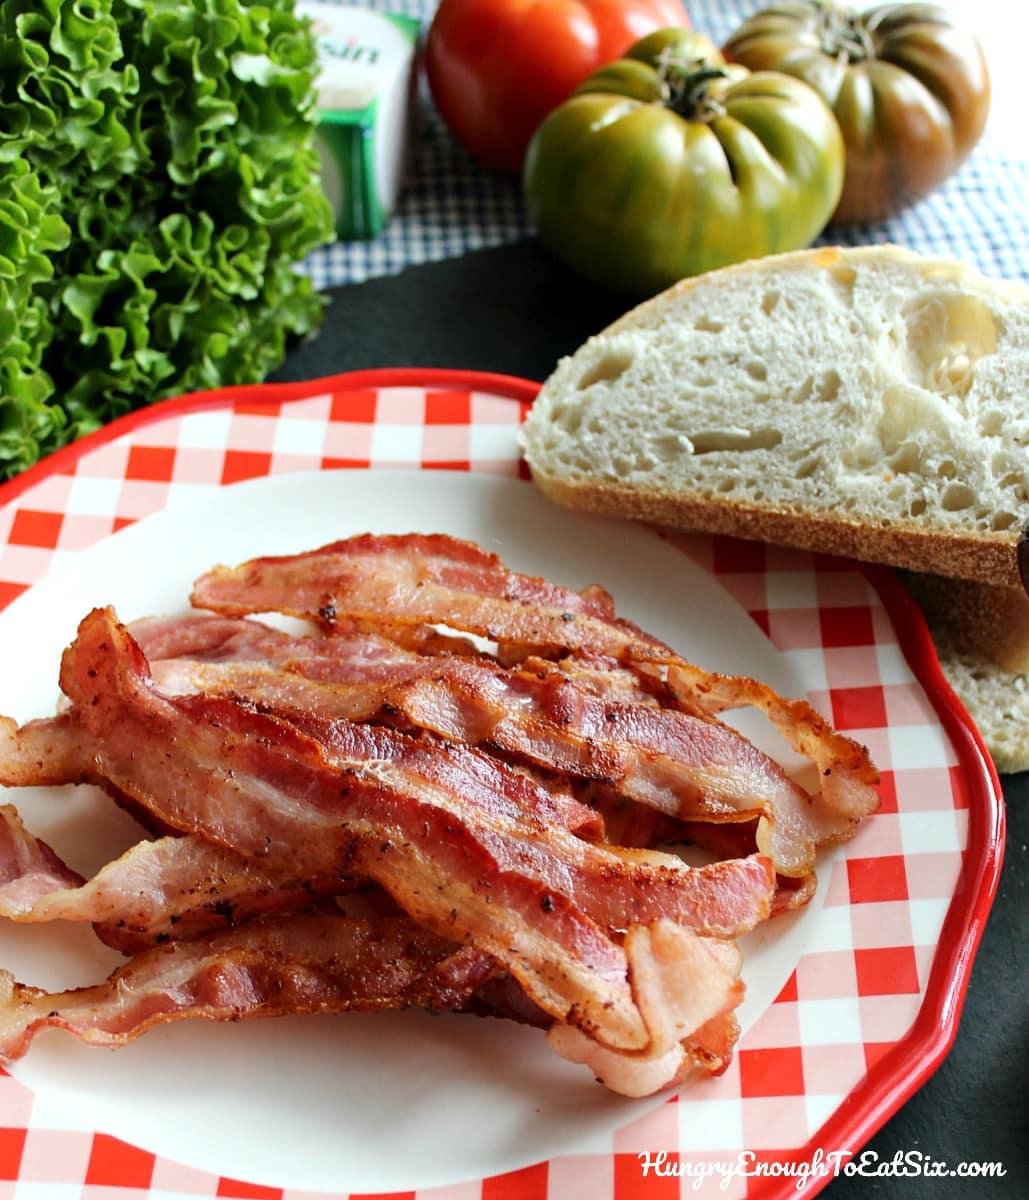 Cooked bacon and sliced bread